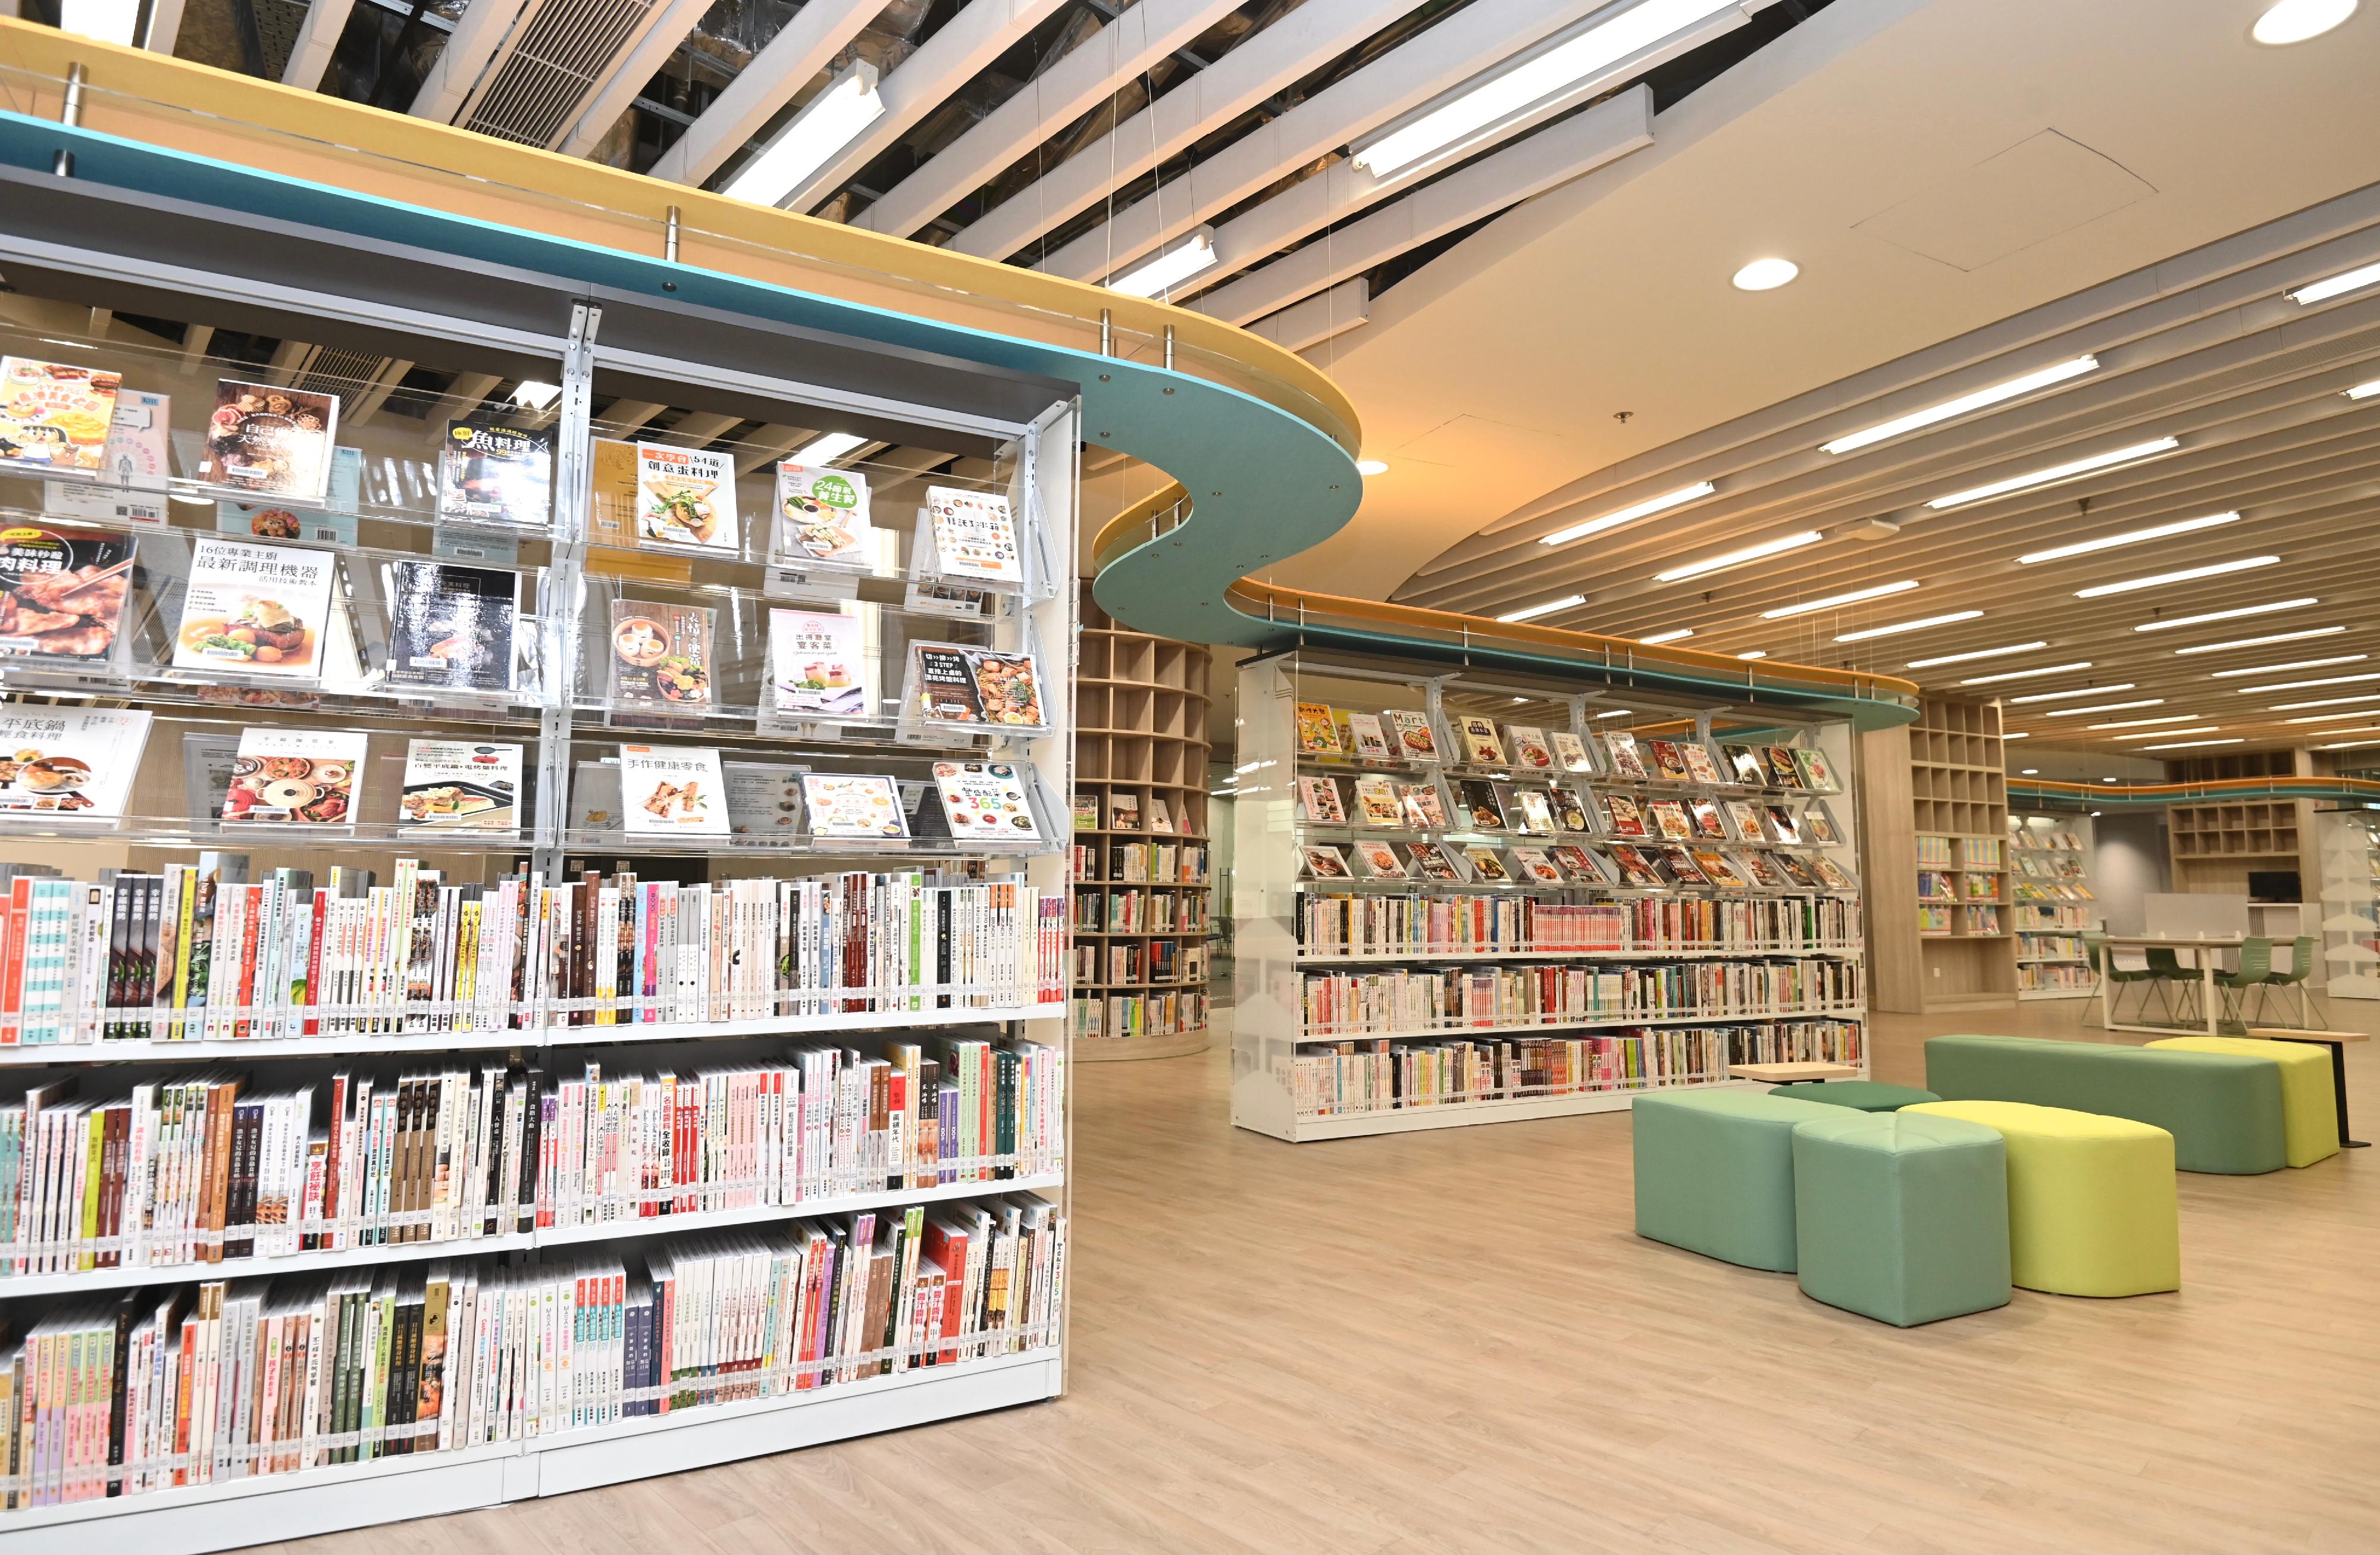 The Sham Shui Po Public Library will come into full operation on March 30 (Thursday). Photo shows the Adult Library inside the library. 